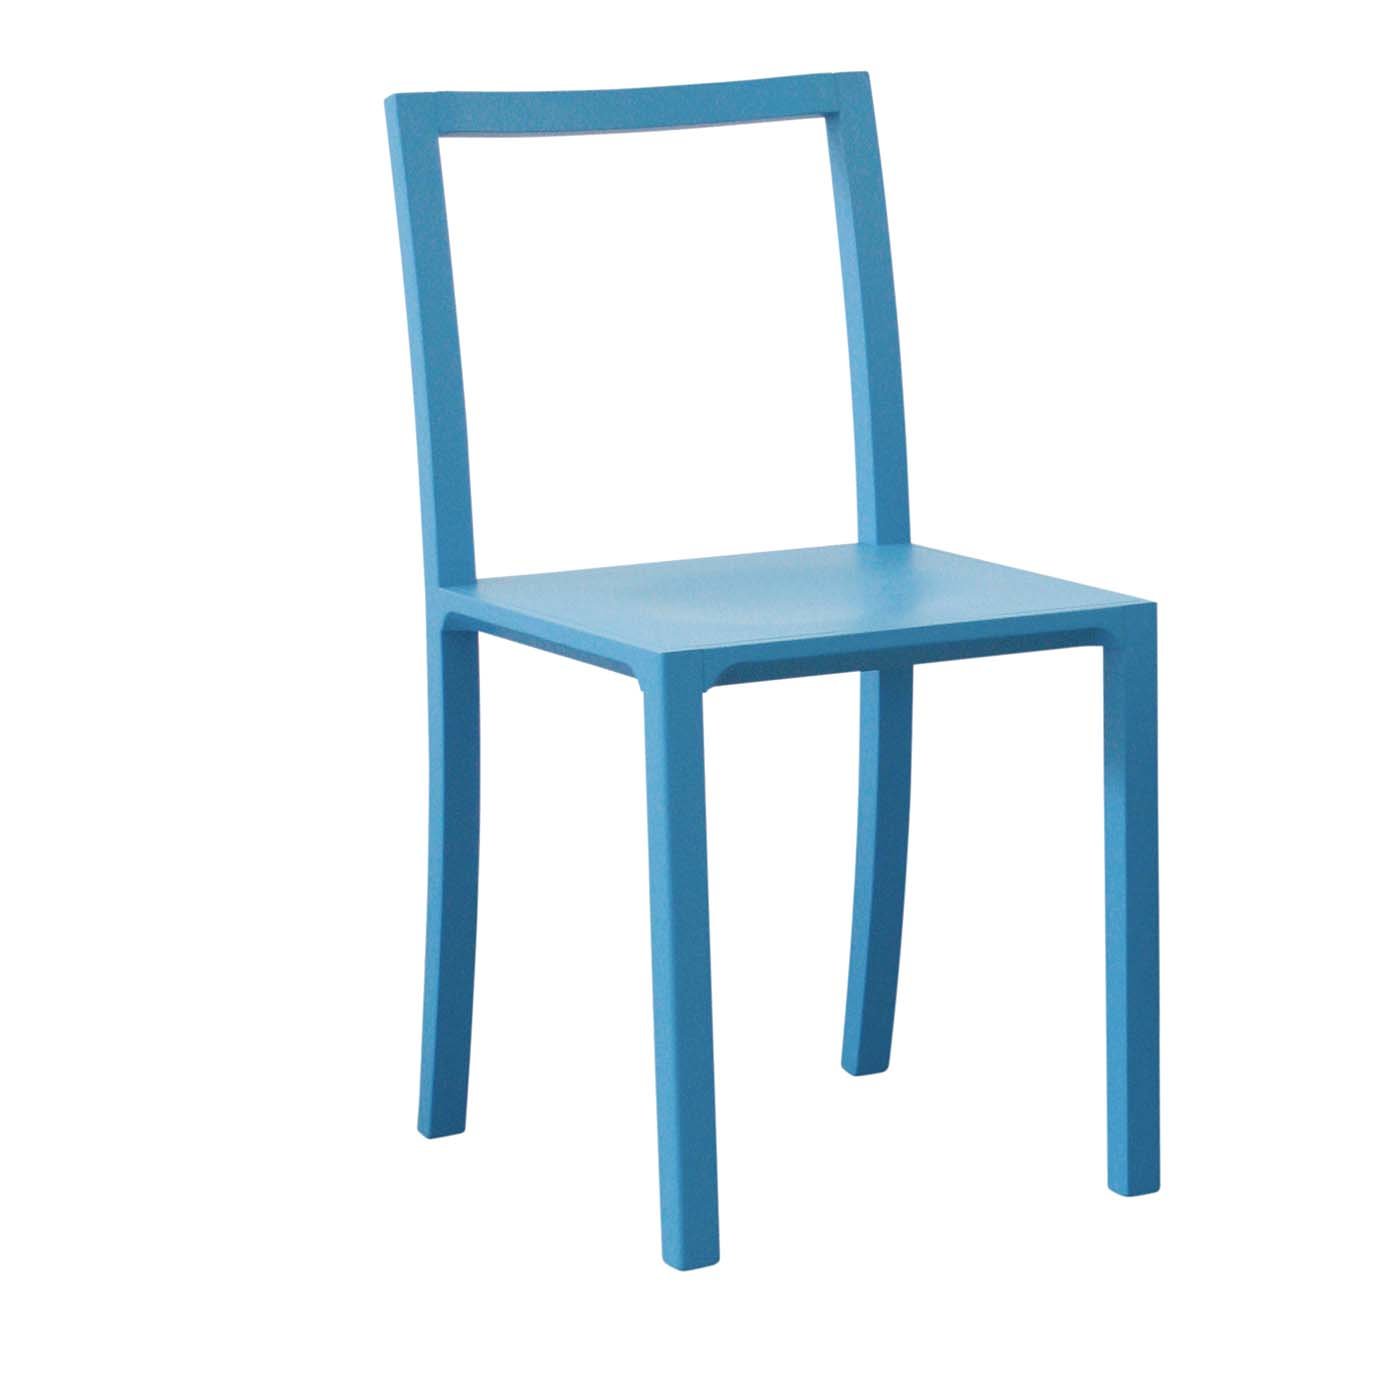 Framework Set of 2 Azure Chairs by Steffen Kehrle - Main view